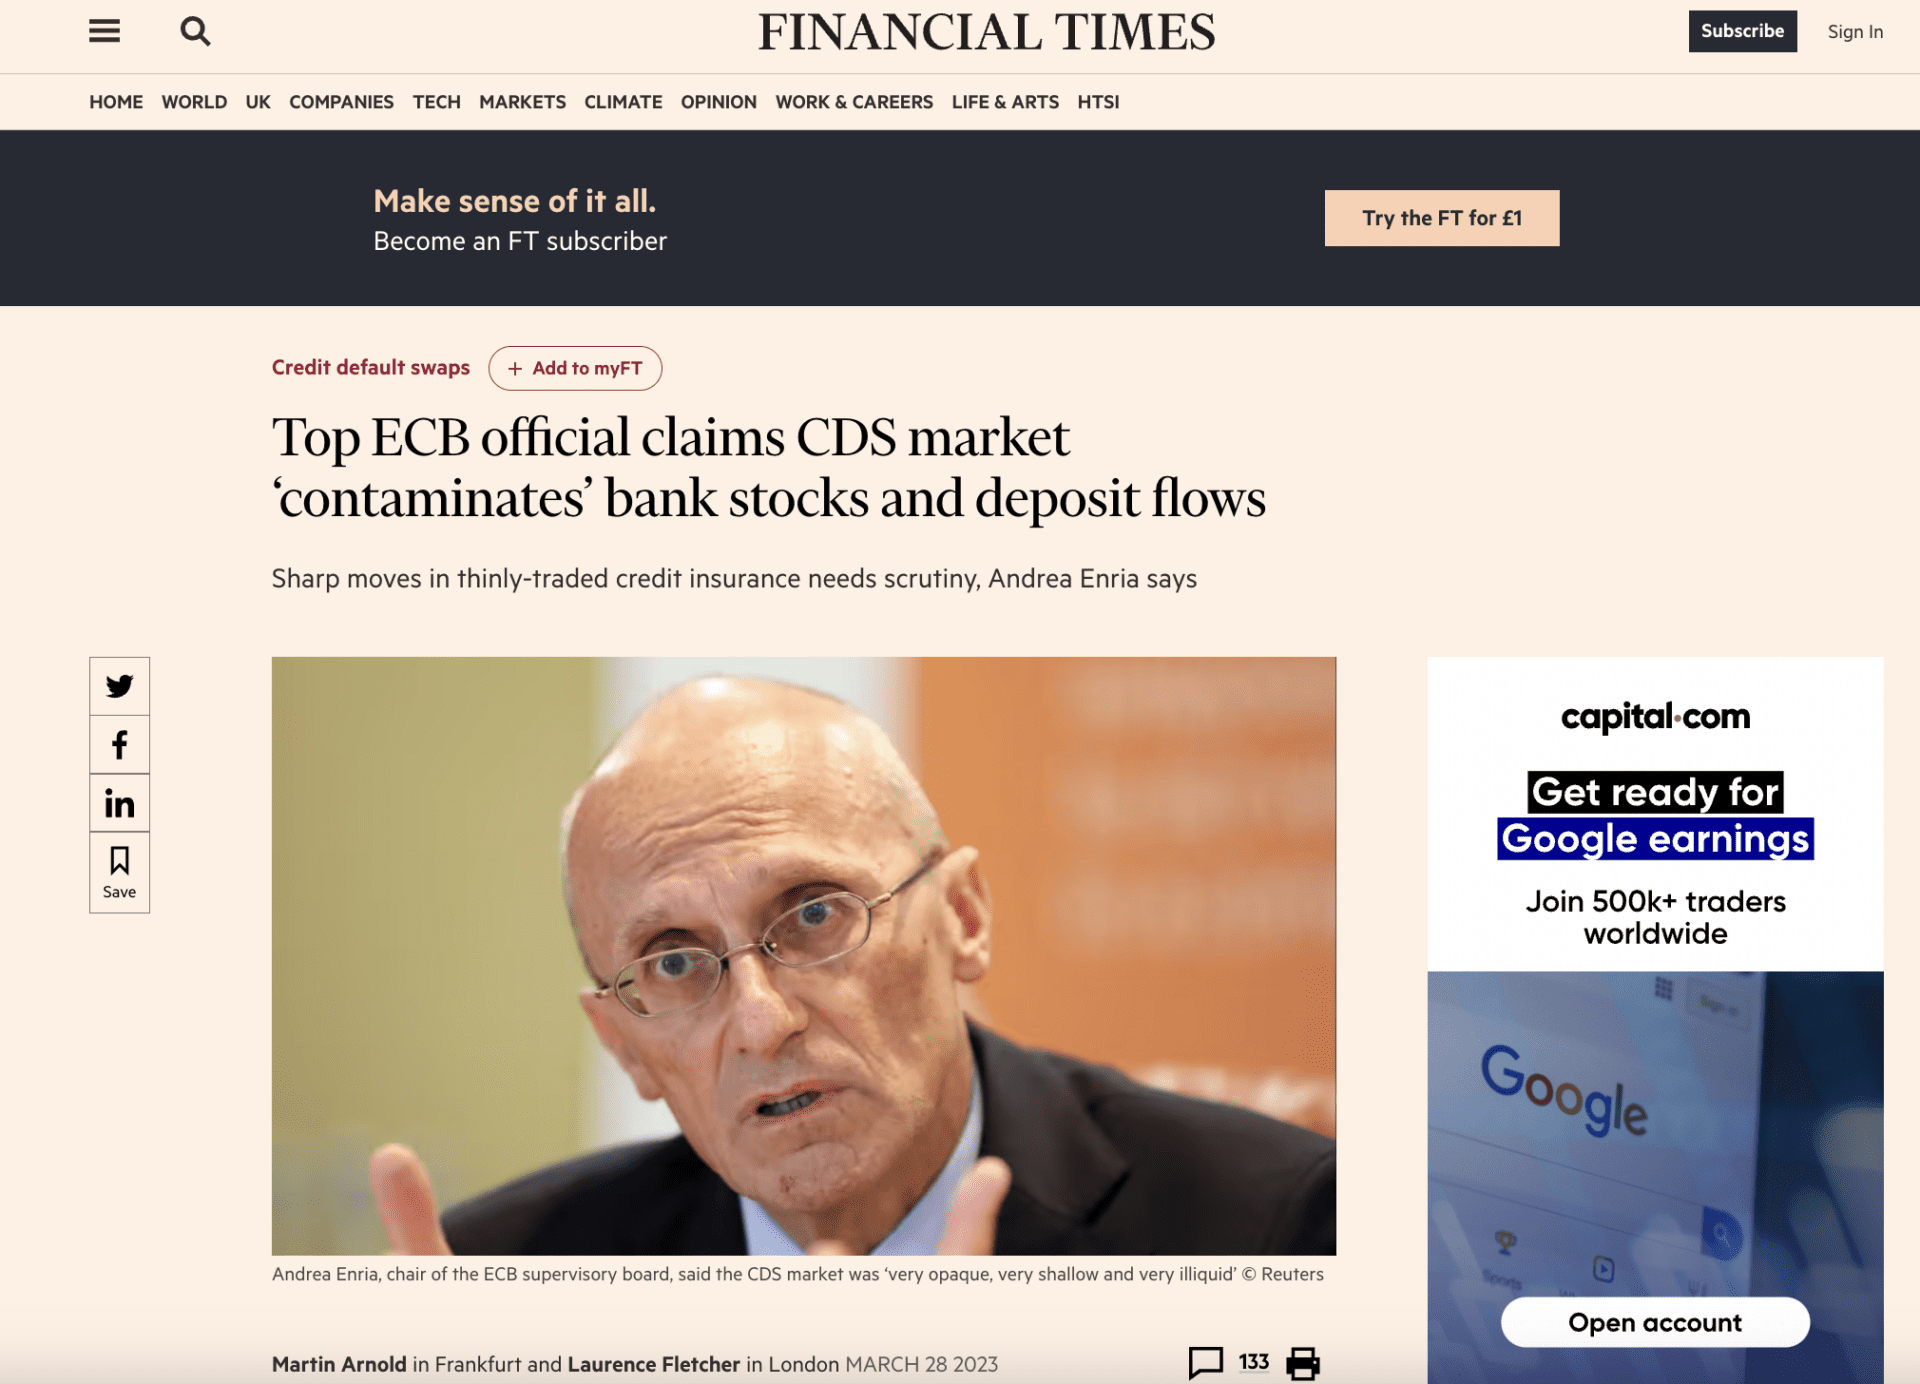 Financial Times: ‘Top ECB official claims CDS market “contaminates” bank stocks and deposit flows’